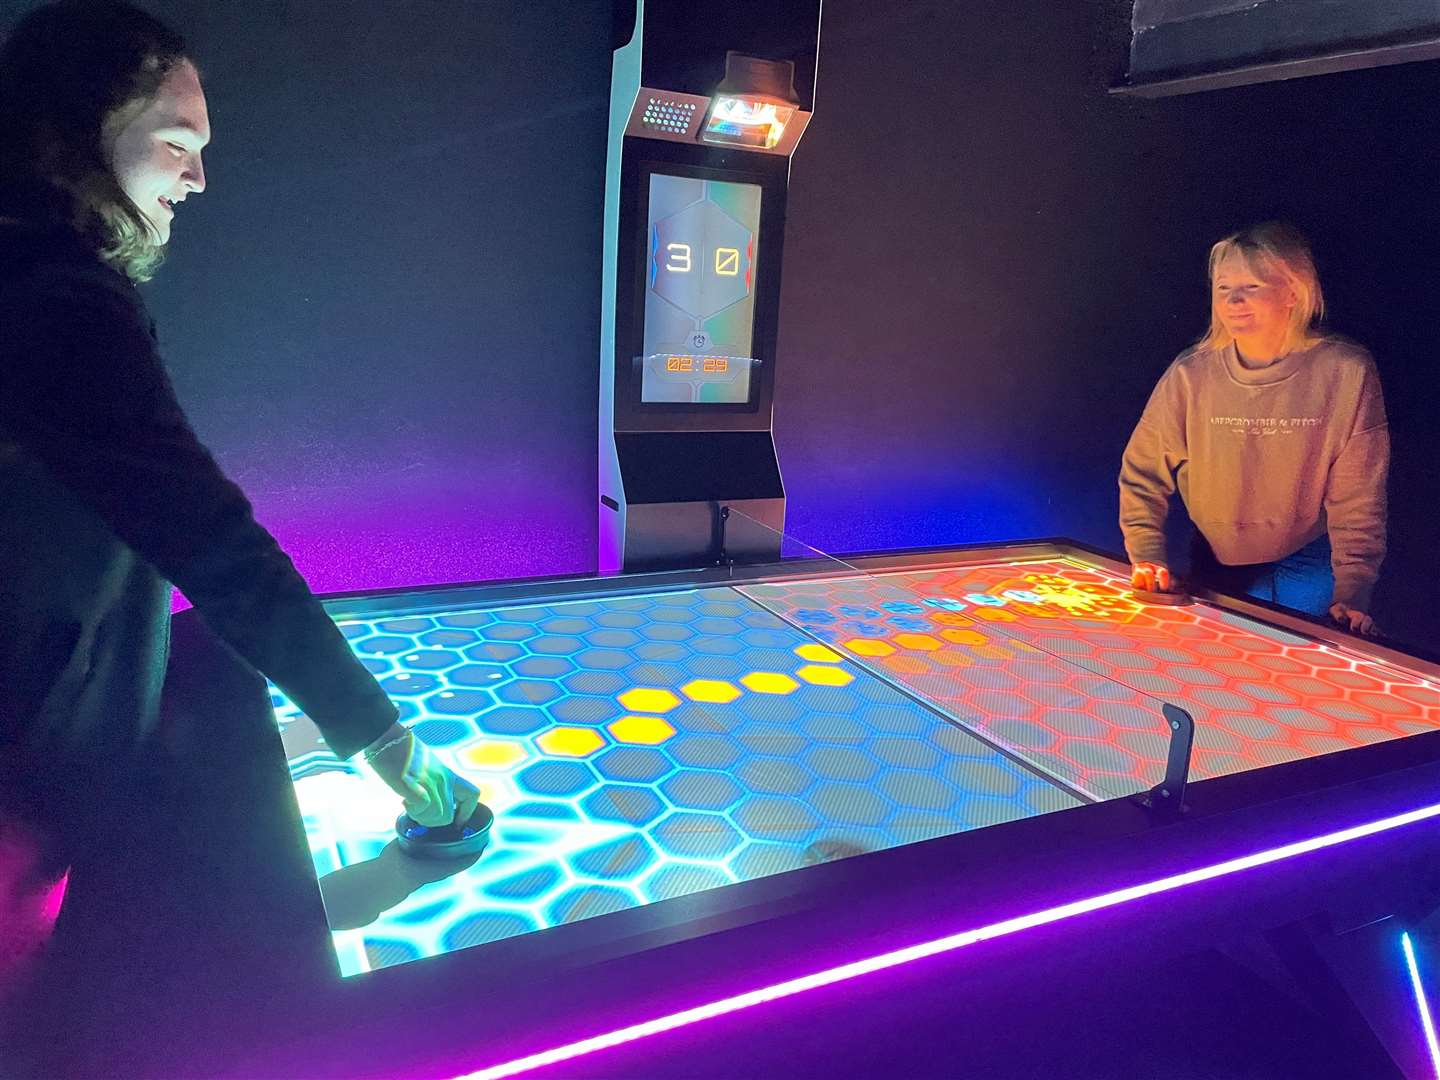 The augmented reality air hockey in action